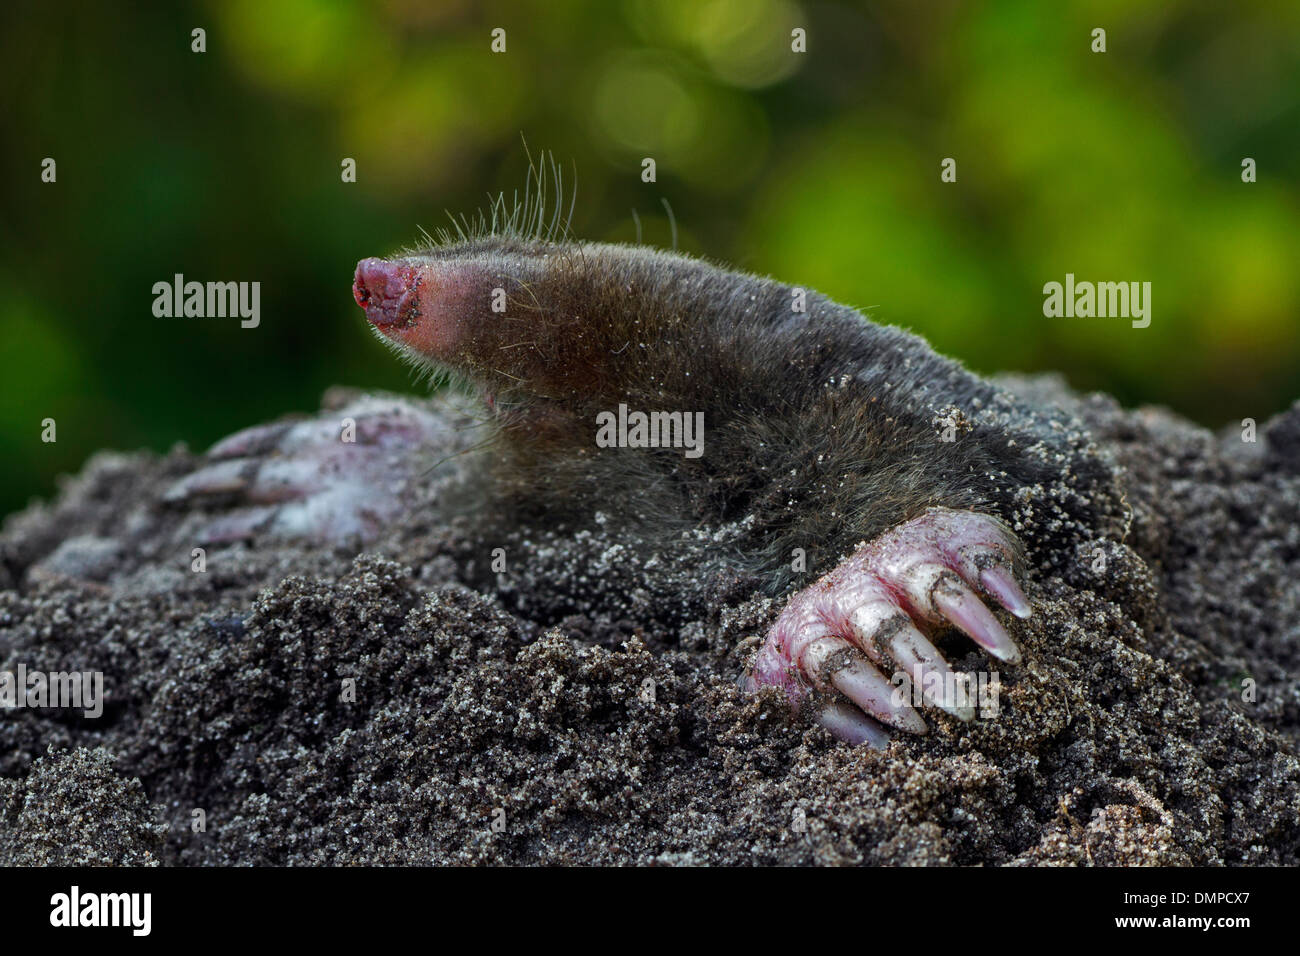 Close up of European mole (Talpa europaea) emerging from molehill and showing large, spade-like forepaws with huge claws Stock Photo